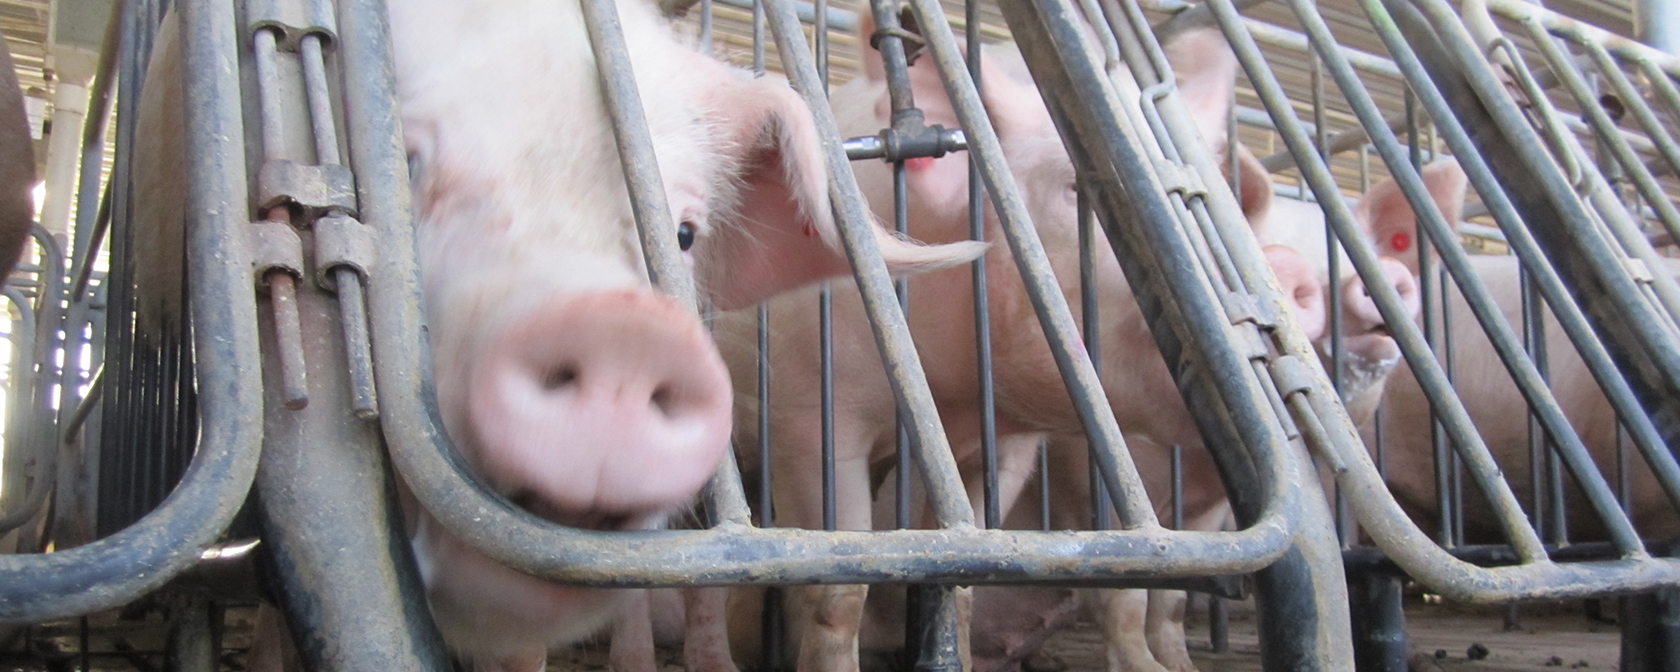 Breaking: Threat to nation's strongest farm animal law deepens in U.S. Congress